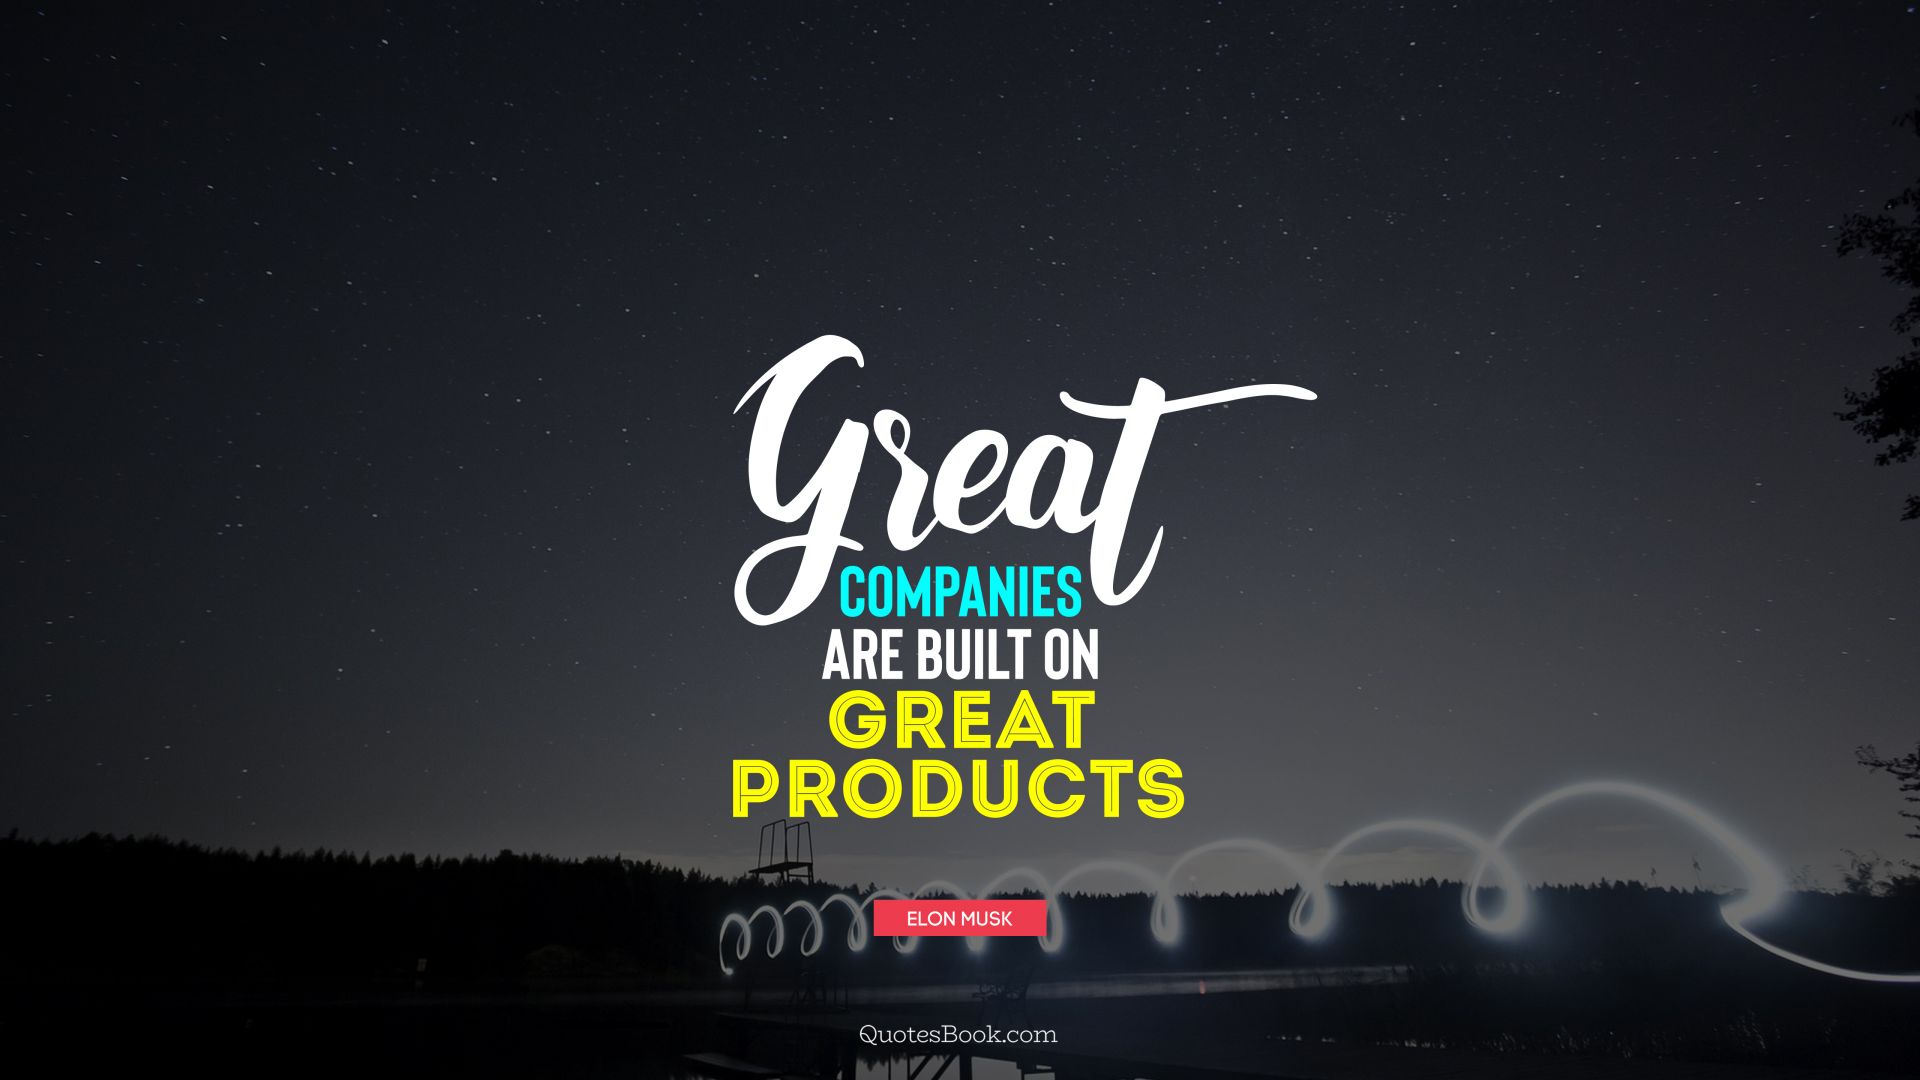 Great companies are built on great products. - Quote by Elon Musk